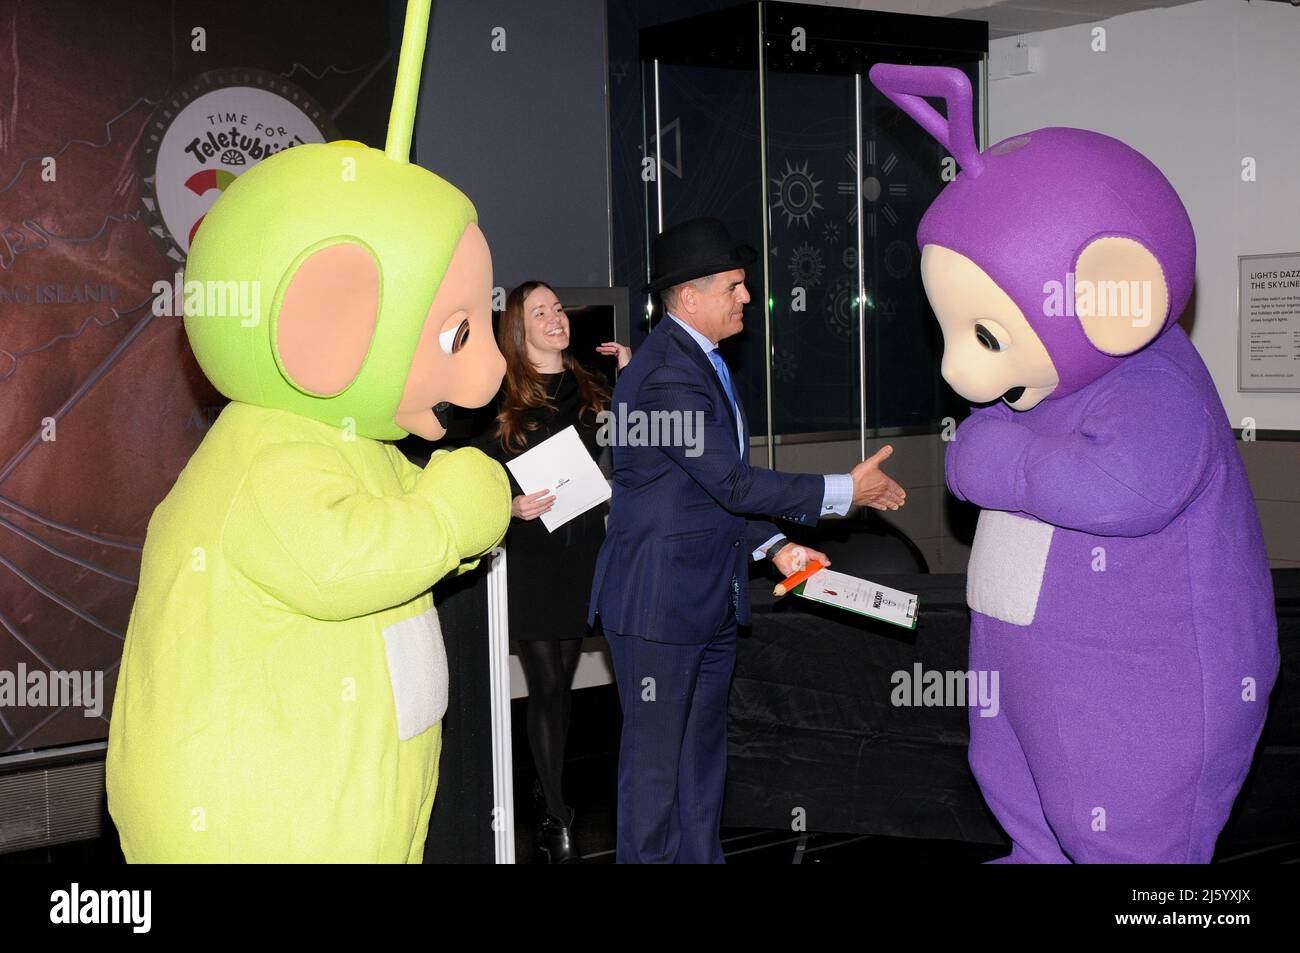 New York, United States. 26th Apr, 2022. The Teletubbies visit the Empire State Building to celebrate their 25th Anniversary in New York City. During their visit a contract was signed with Lloyd's of London for 5 million dollars each. (Photo by Efren Landaos/SOPA Images/Sipa USA) Credit: Sipa USA/Alamy Live News Stock Photo